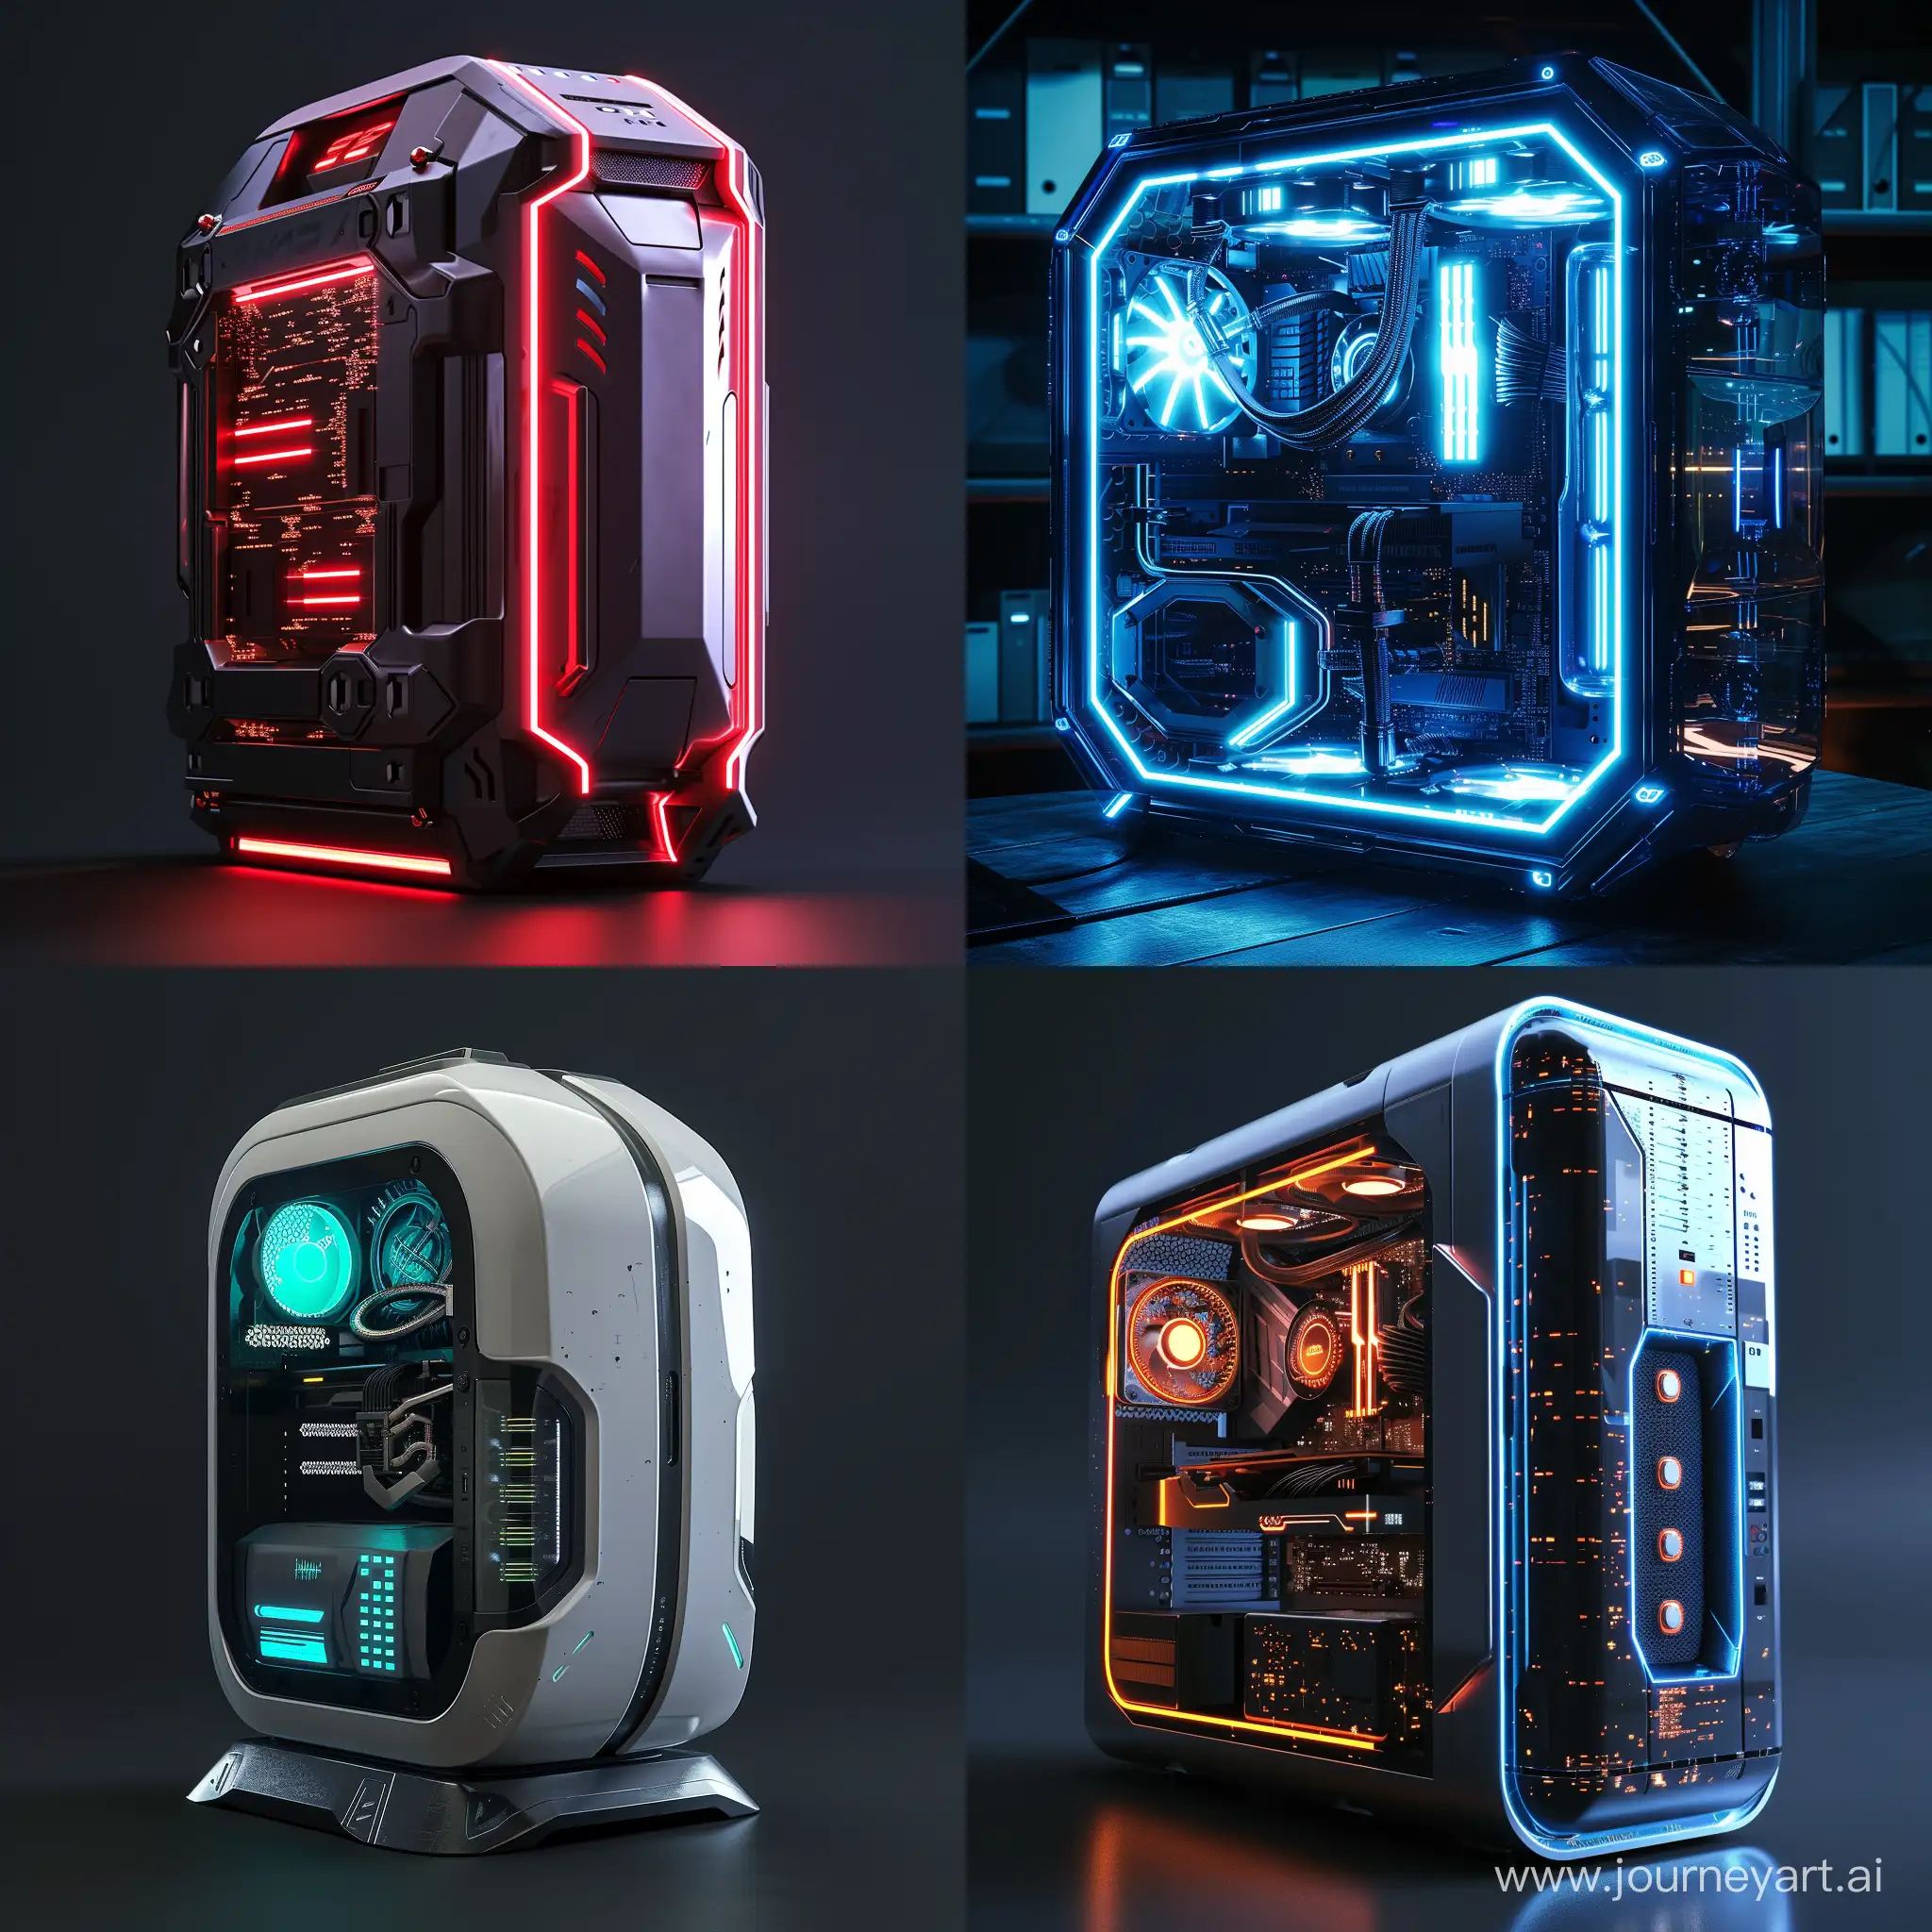 Futuristic PC case, strong artificial intelligence technology, in cinematic futuristic style